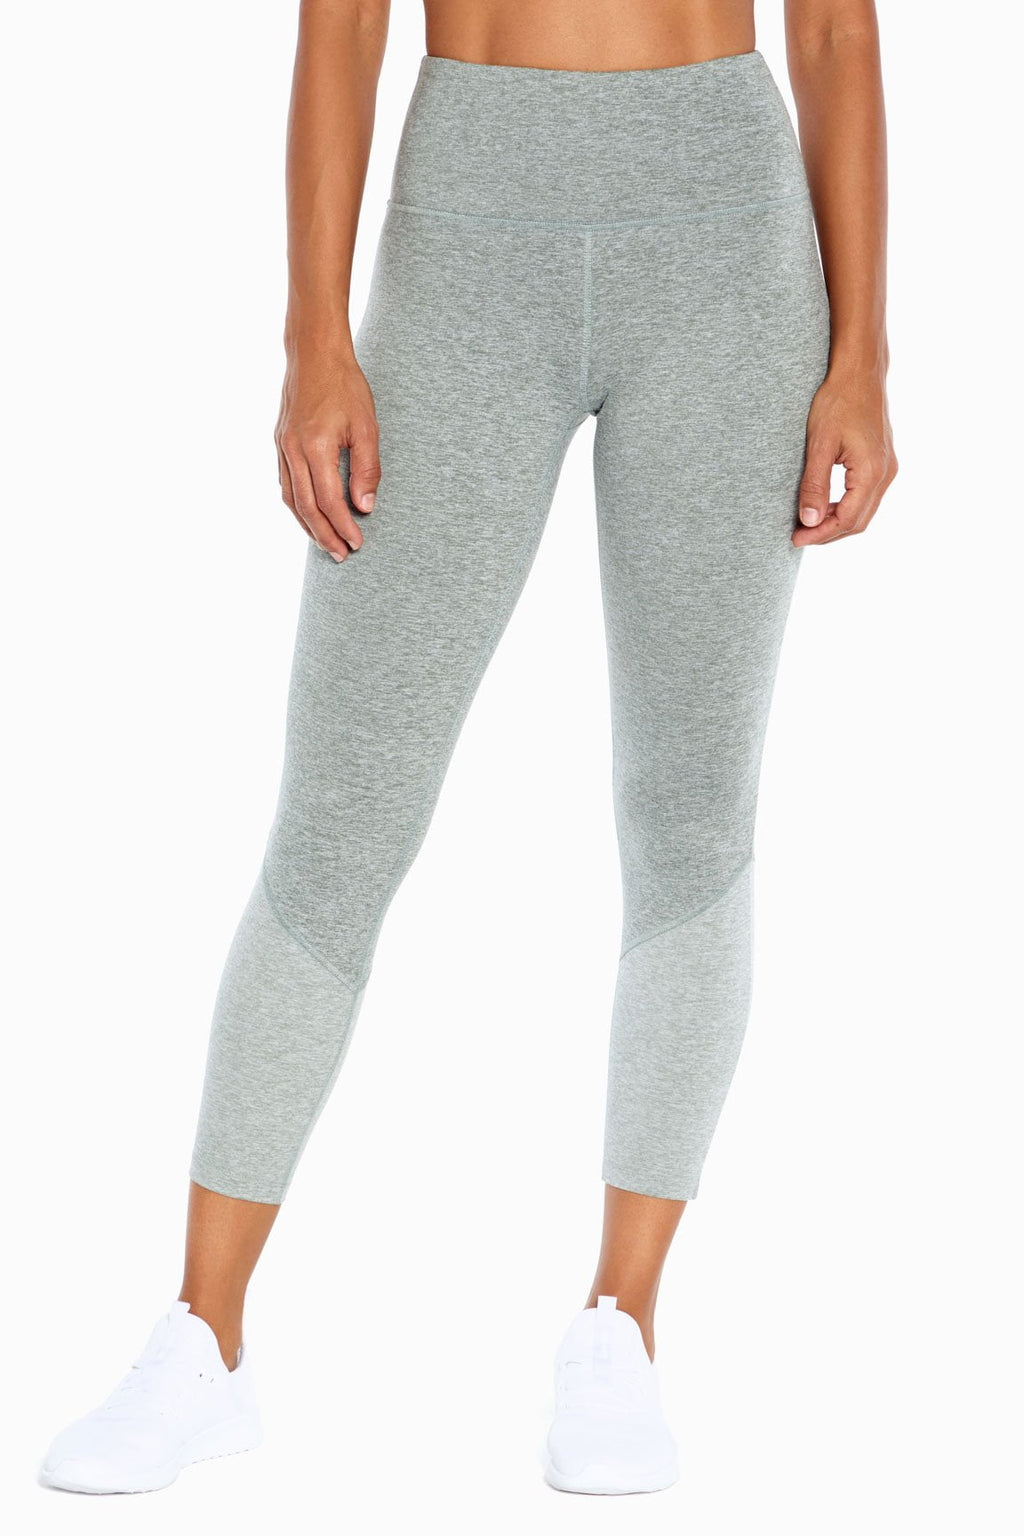 Zobha Athletic Leggings Workout Tights Womens Small Muscari Blue Straight  Leg - $28 New With Tags - From Debbie